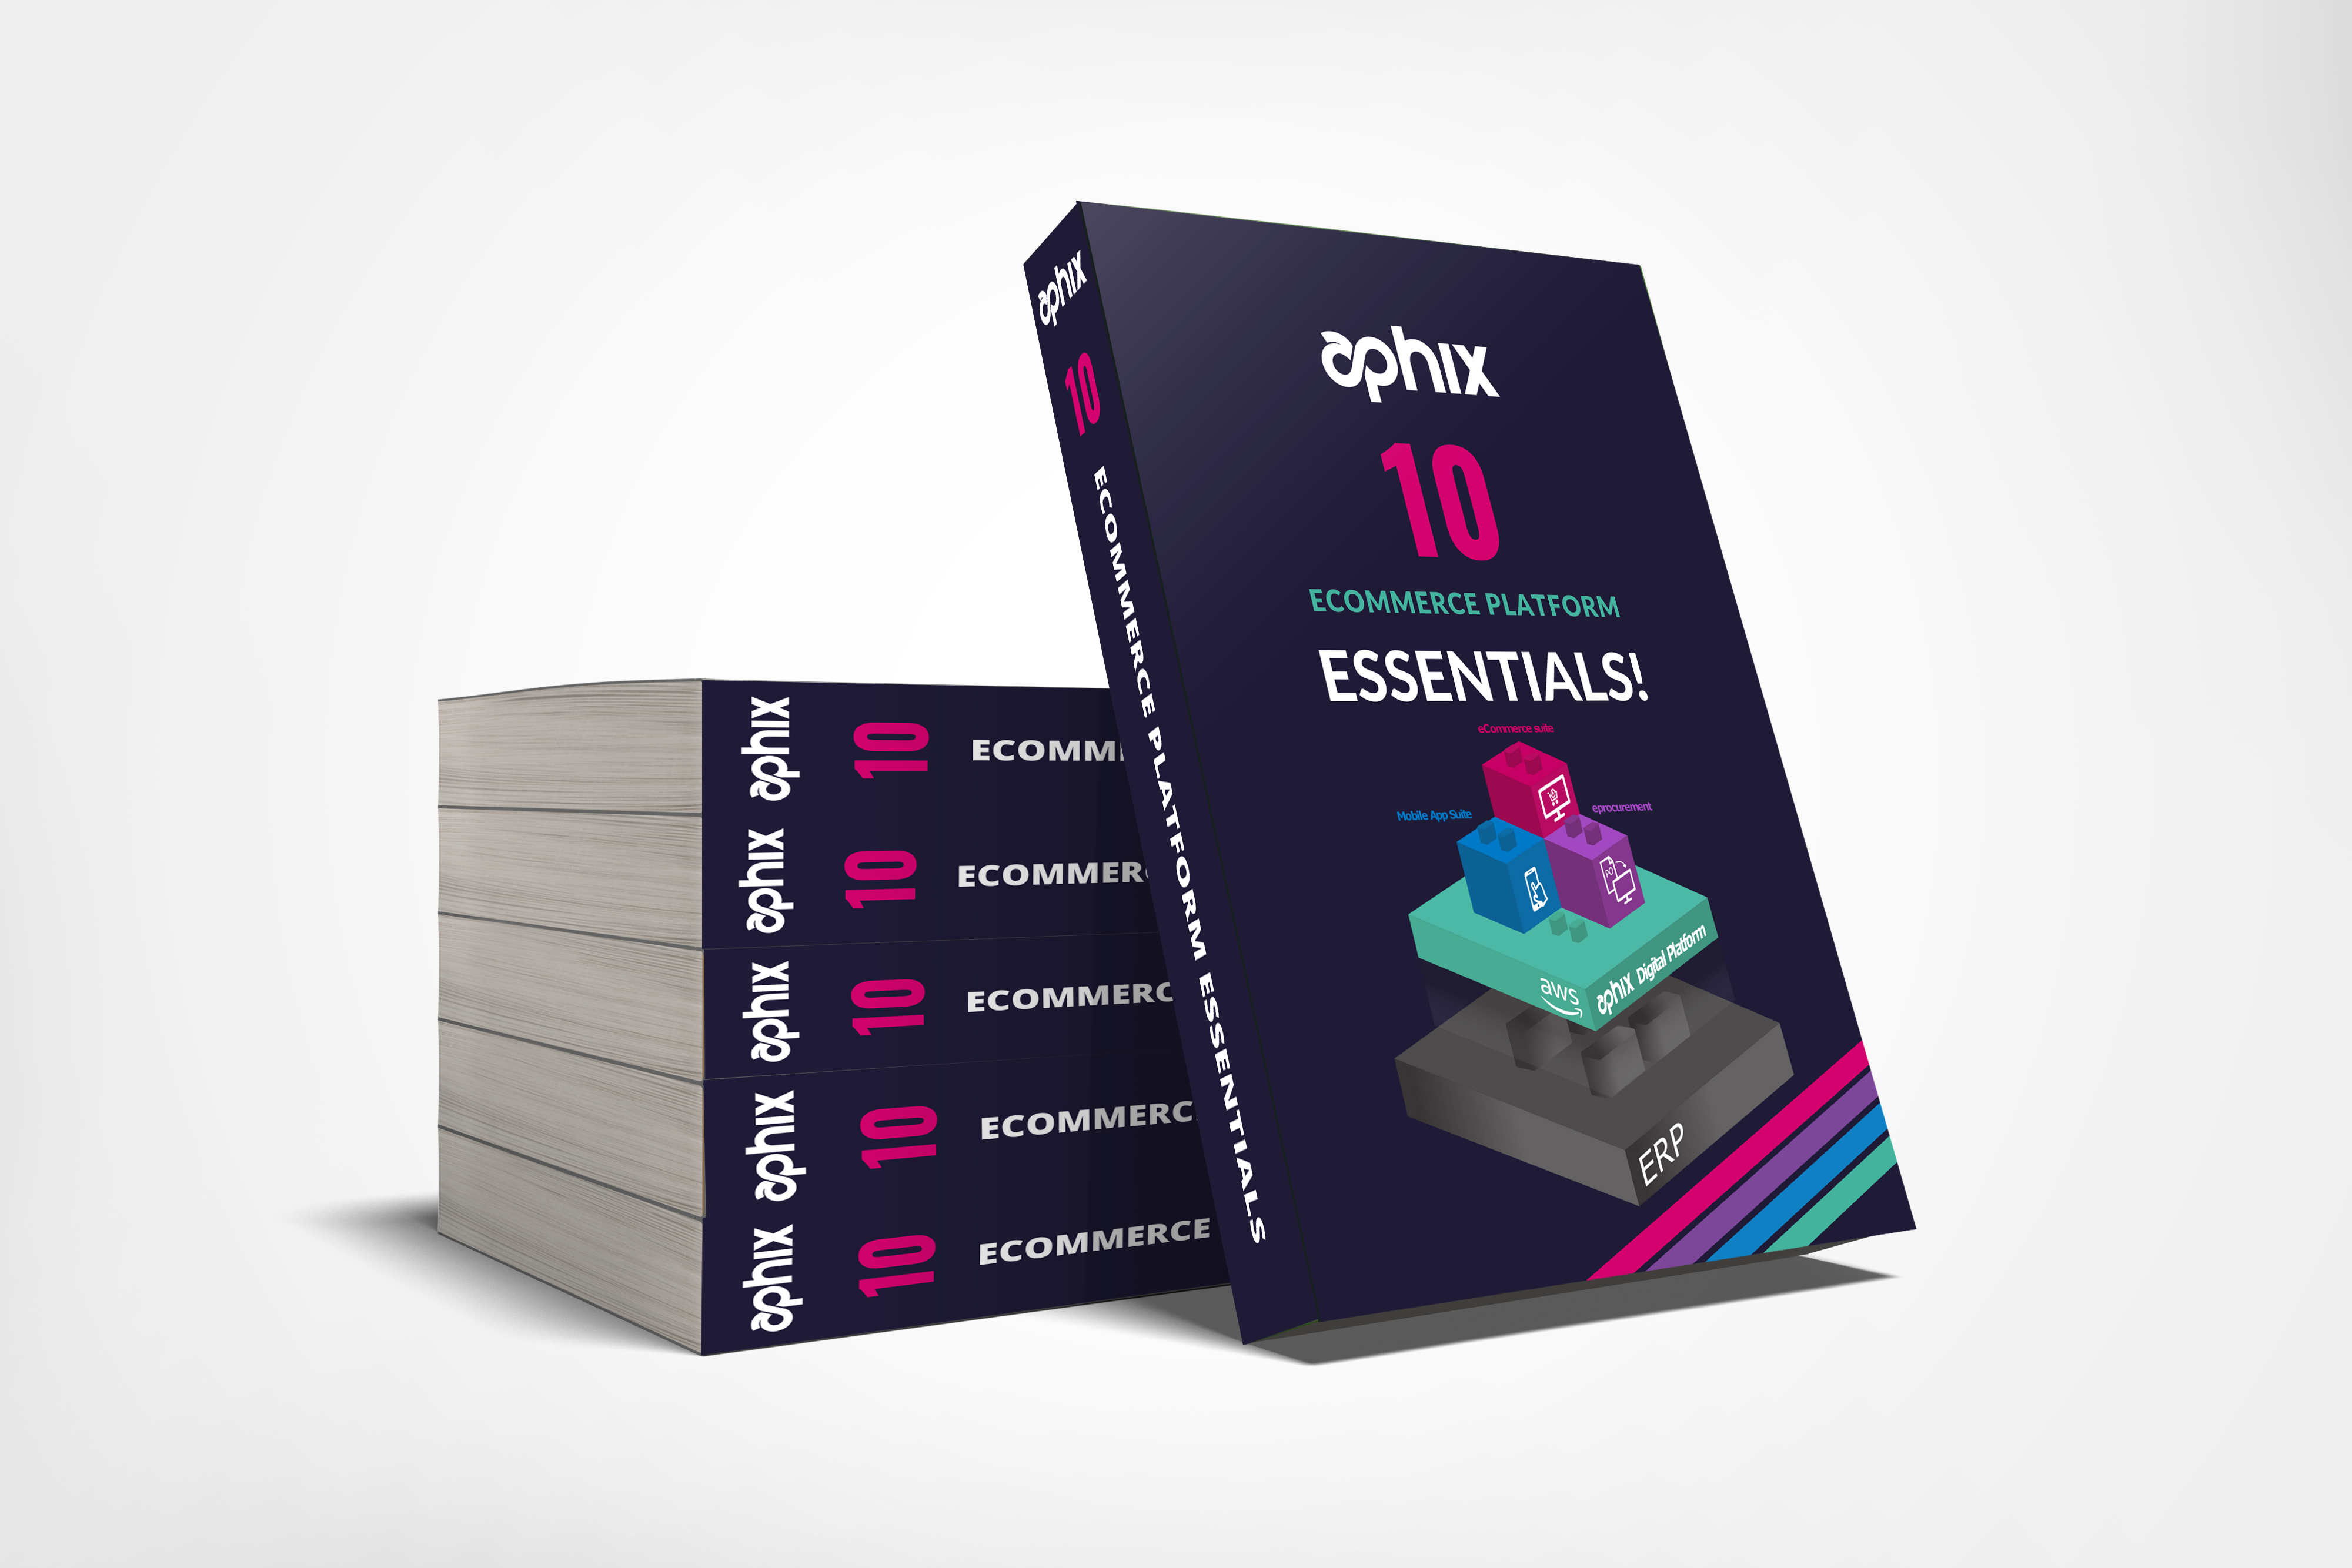 10 ecommerce platfrom essentials stack copy